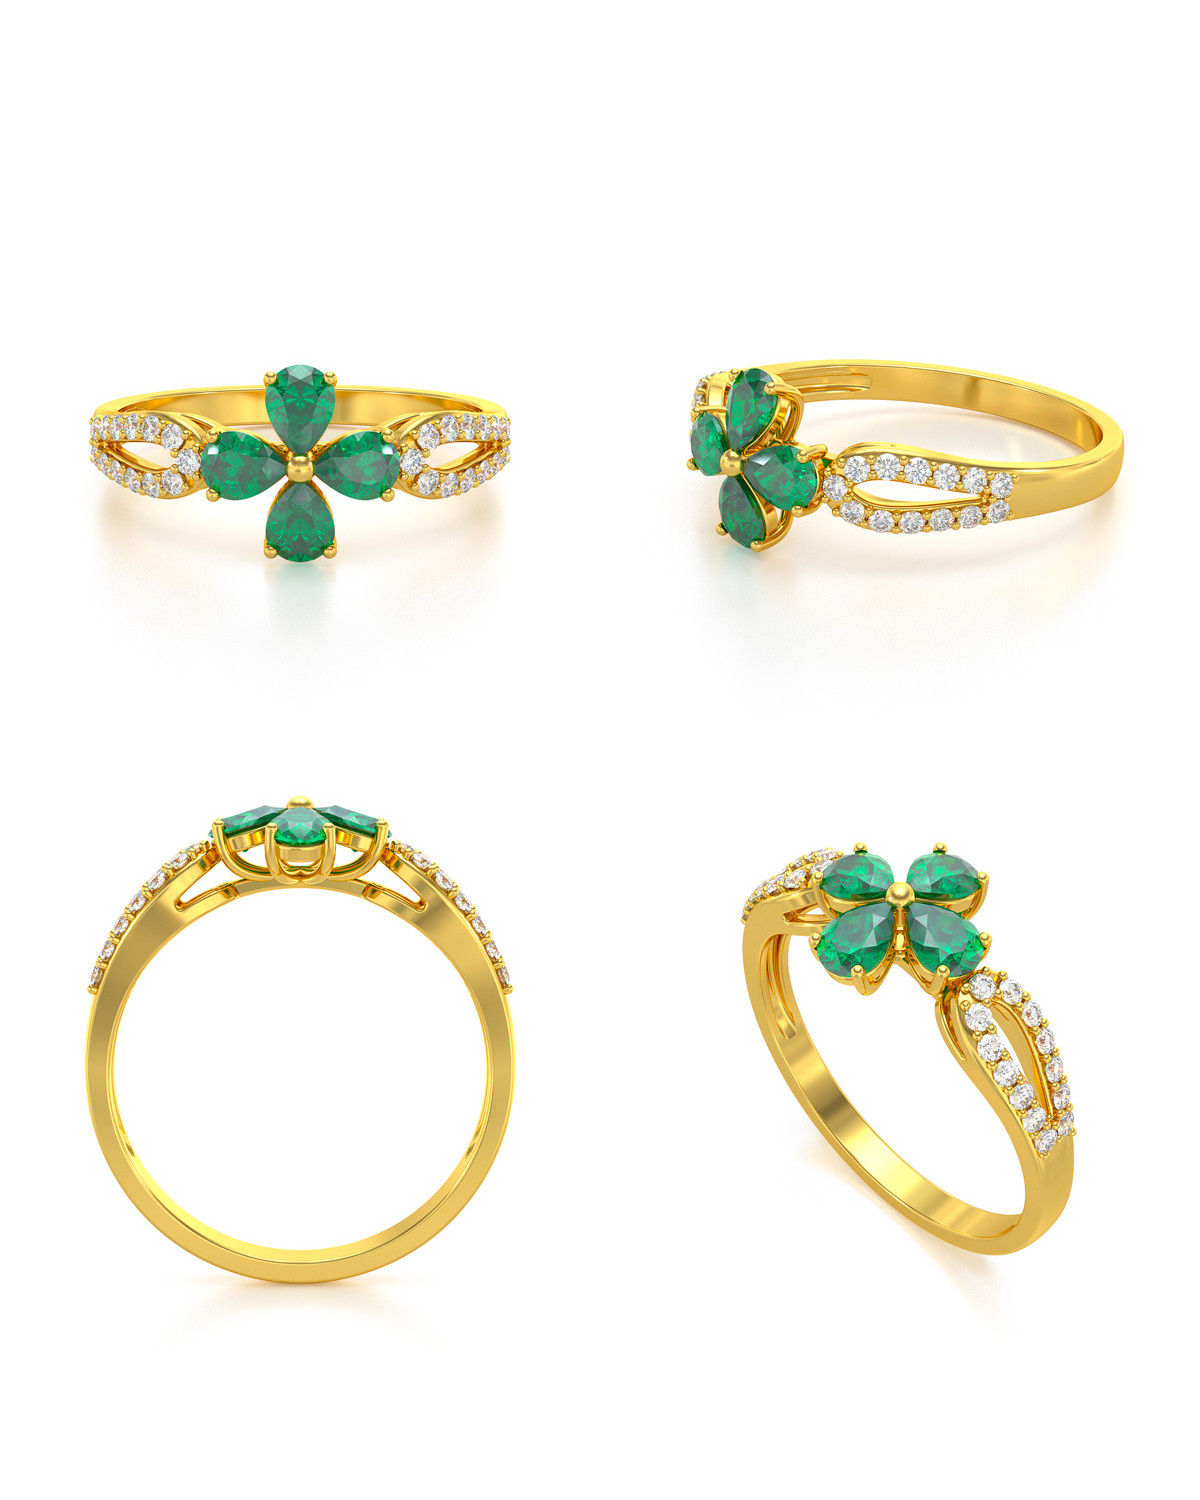 1 Gram Gold Forming Green Stone With Diamond Best Quality Ring - Style A883  at Rs 2380.00 | Rajkot| ID: 26482755962